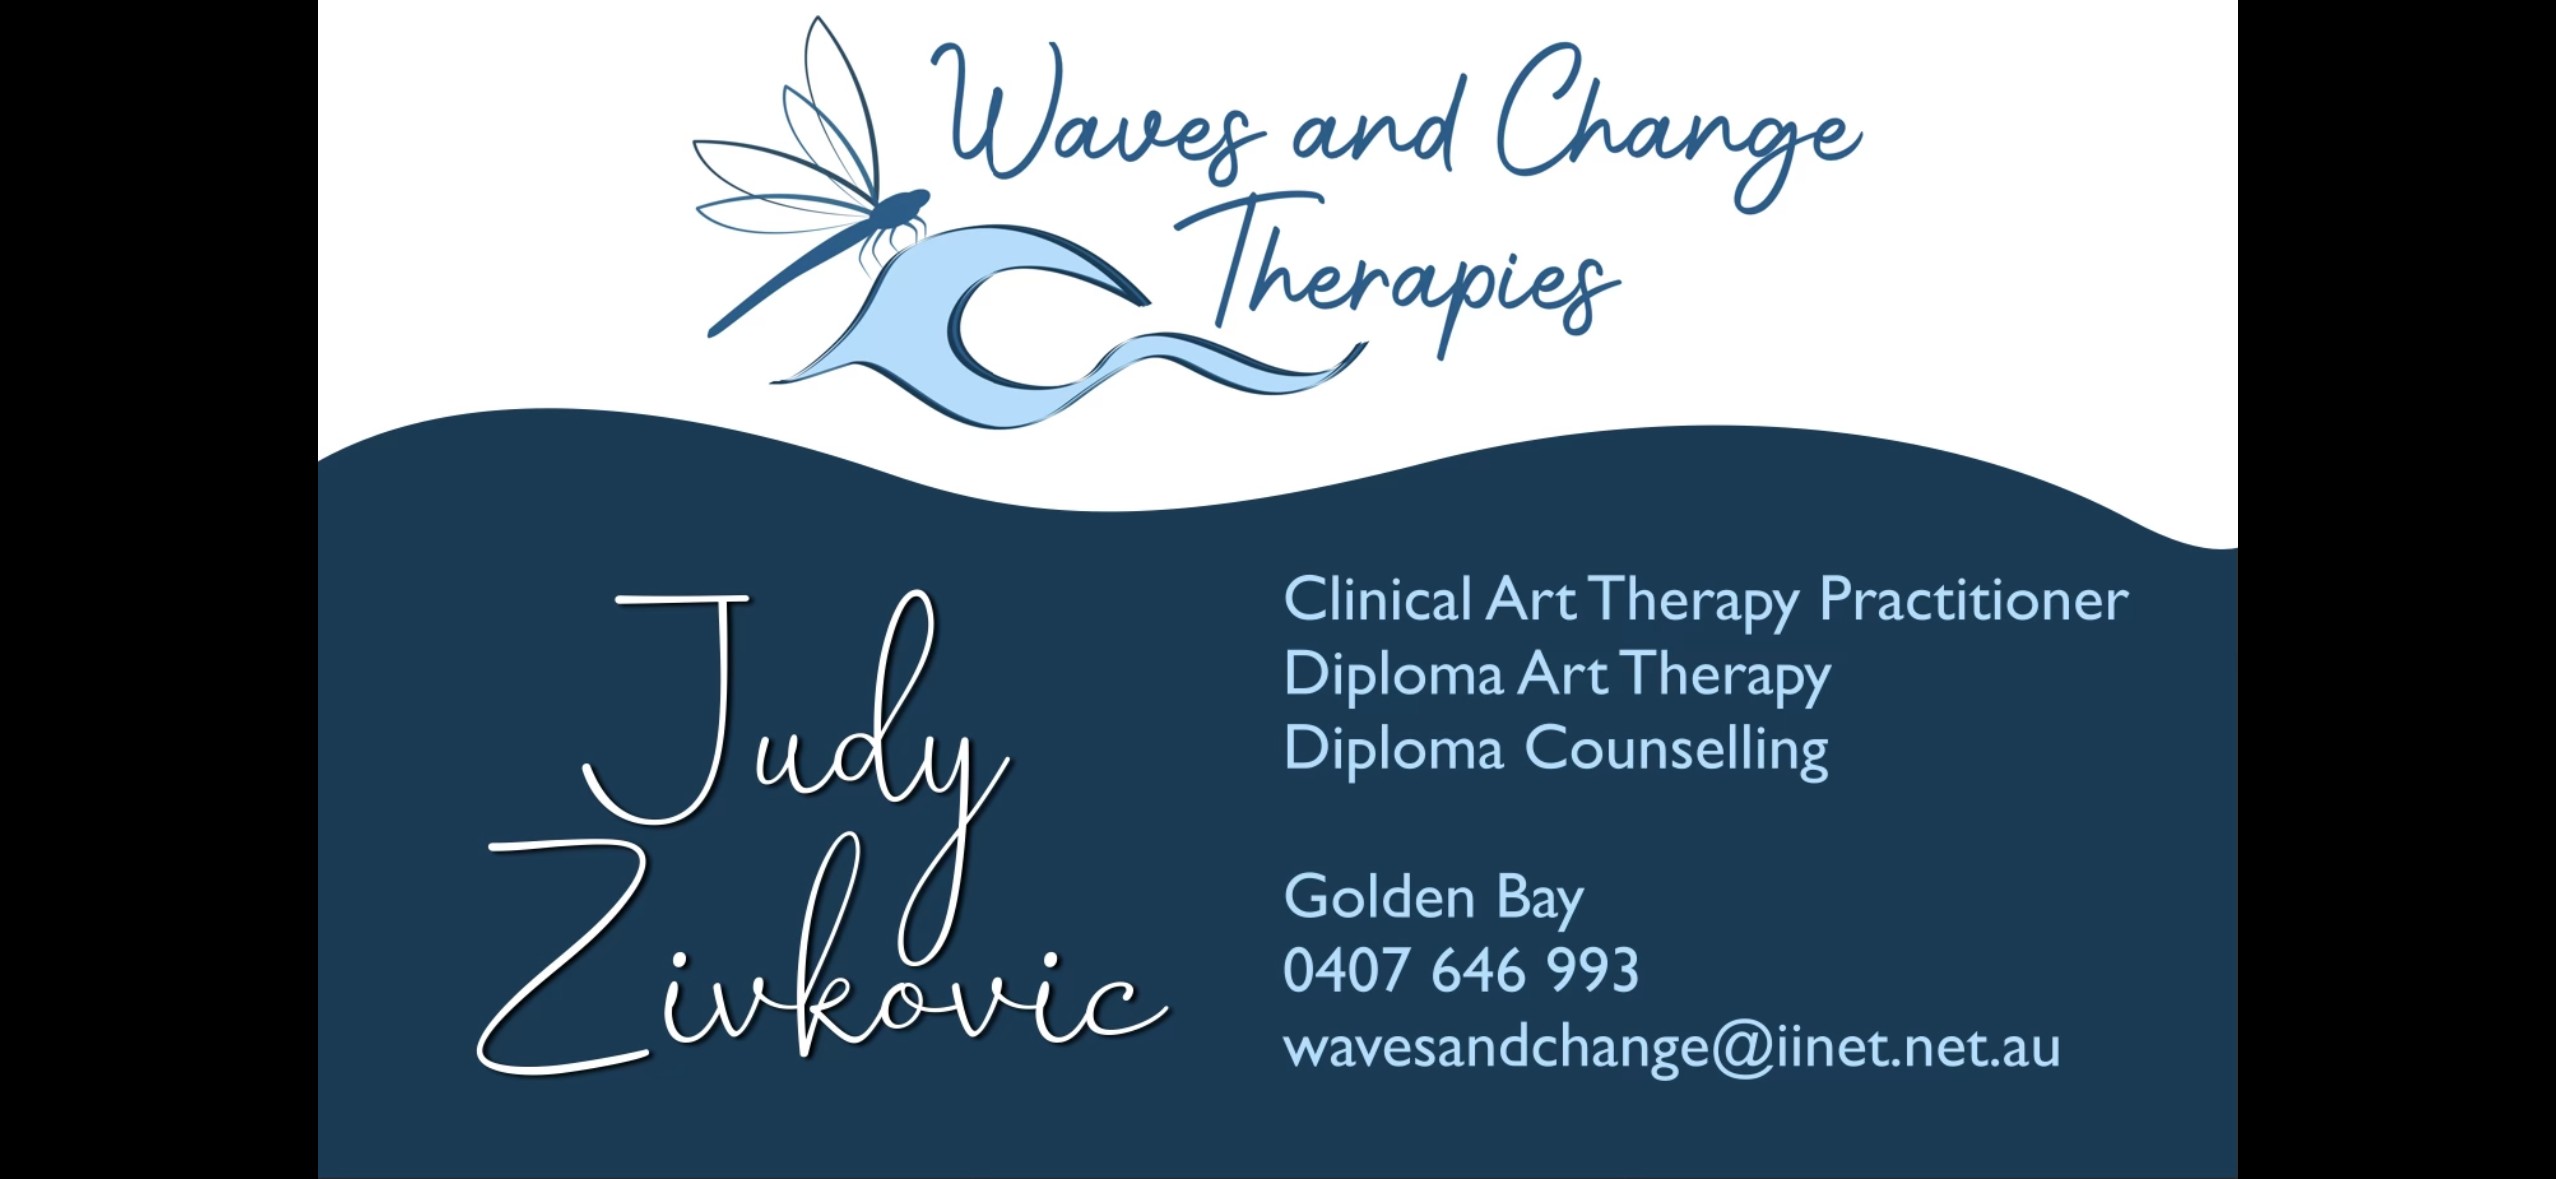 Judy ZIVKOVIS therapist on Natural Therapy Pages